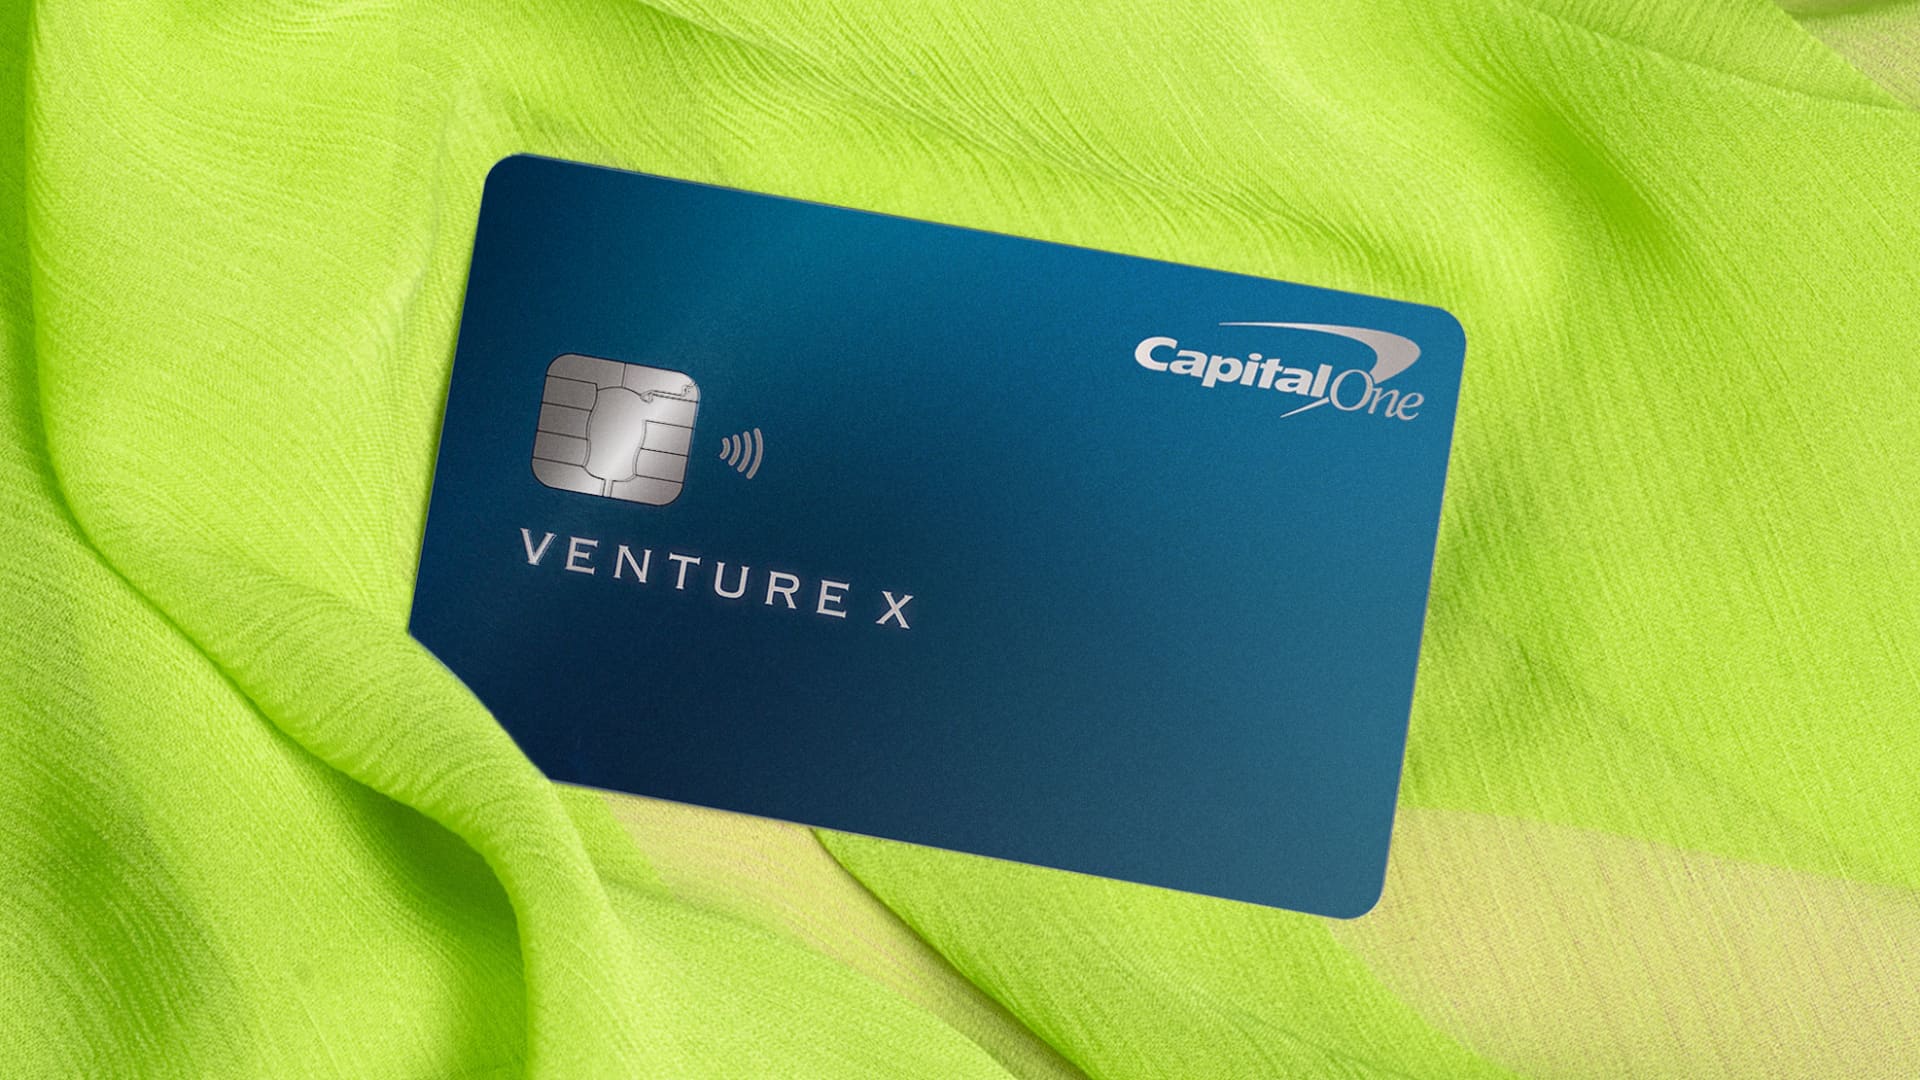 What credit score do you need to get a Capital One Venture X card? - CNBC